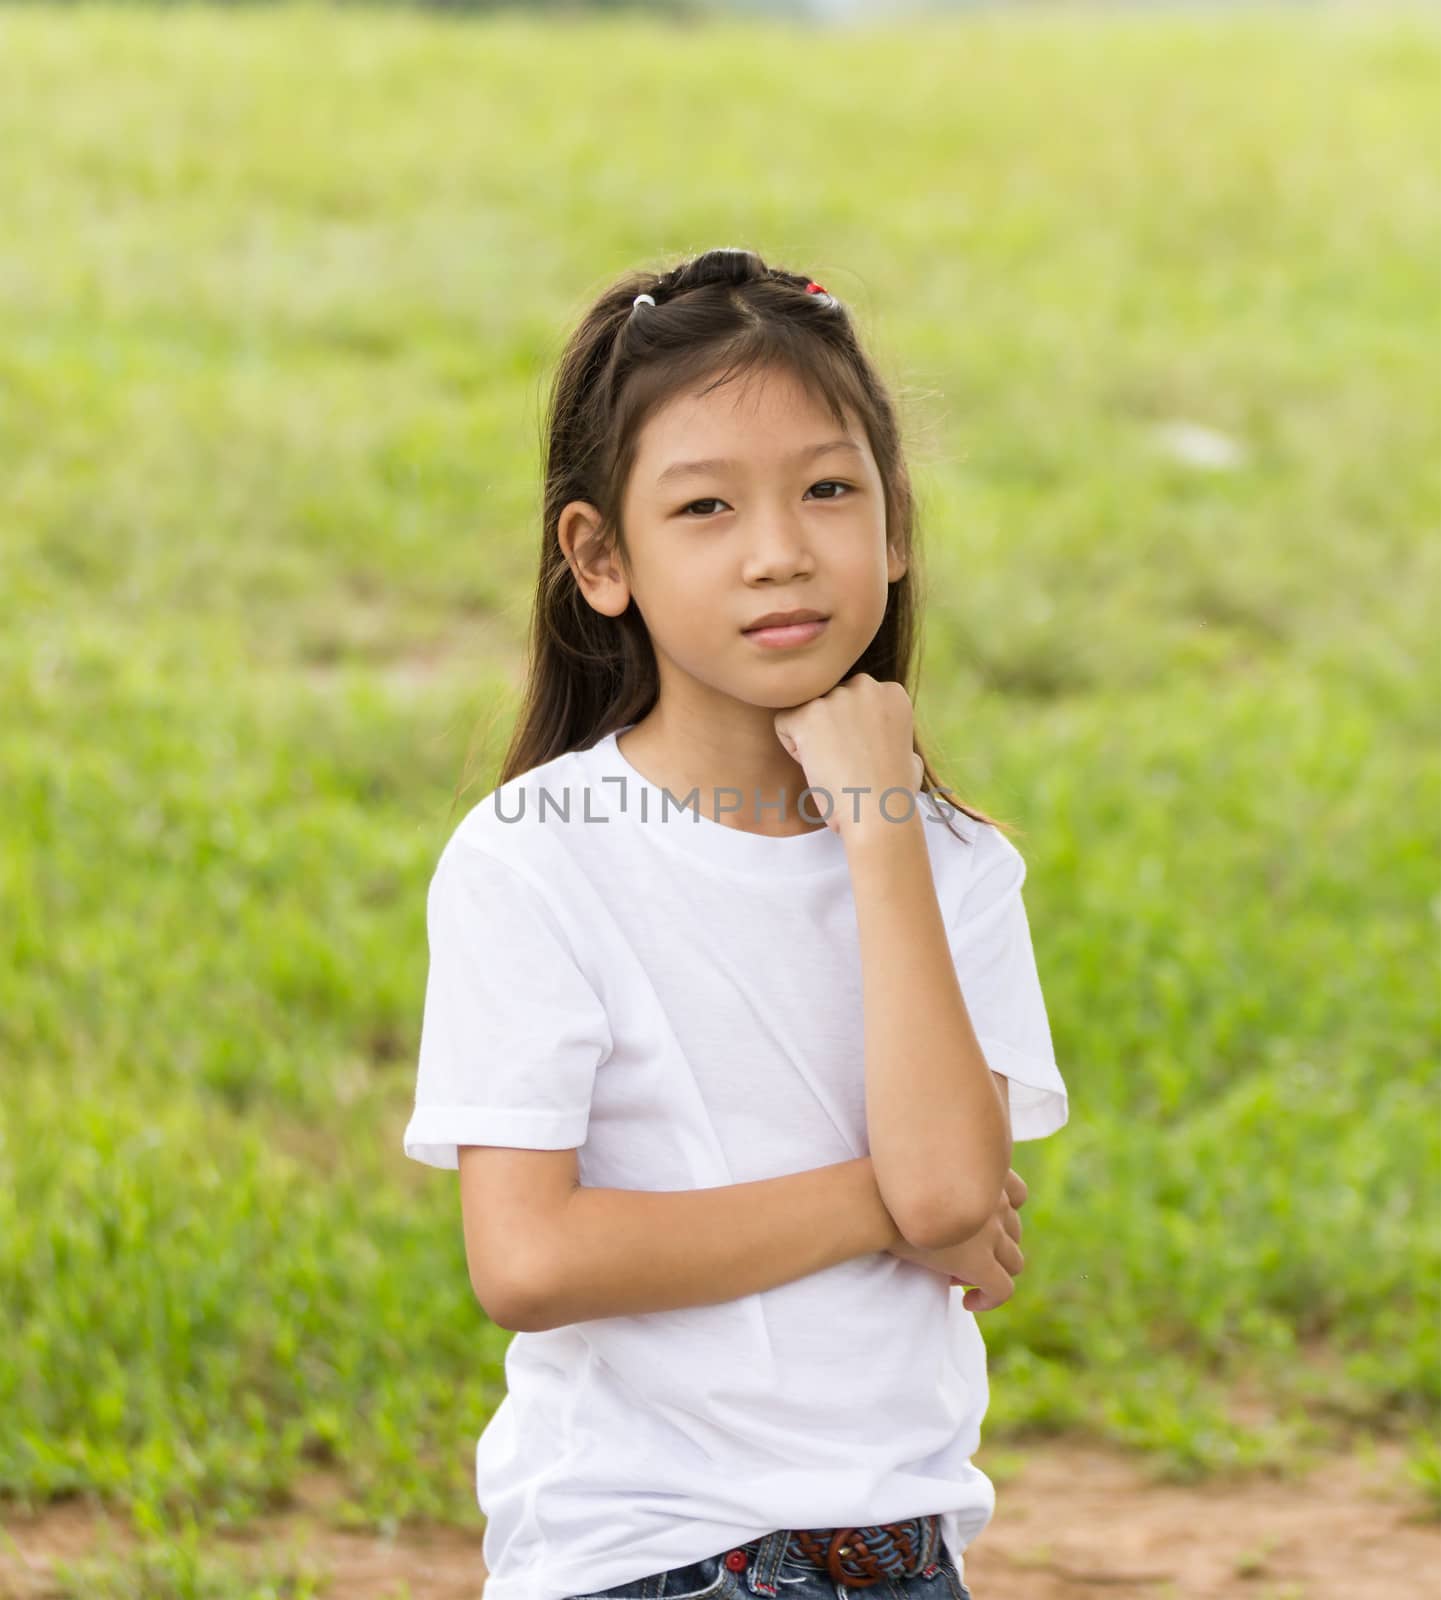 Portrait of Asian young girl by stoonn